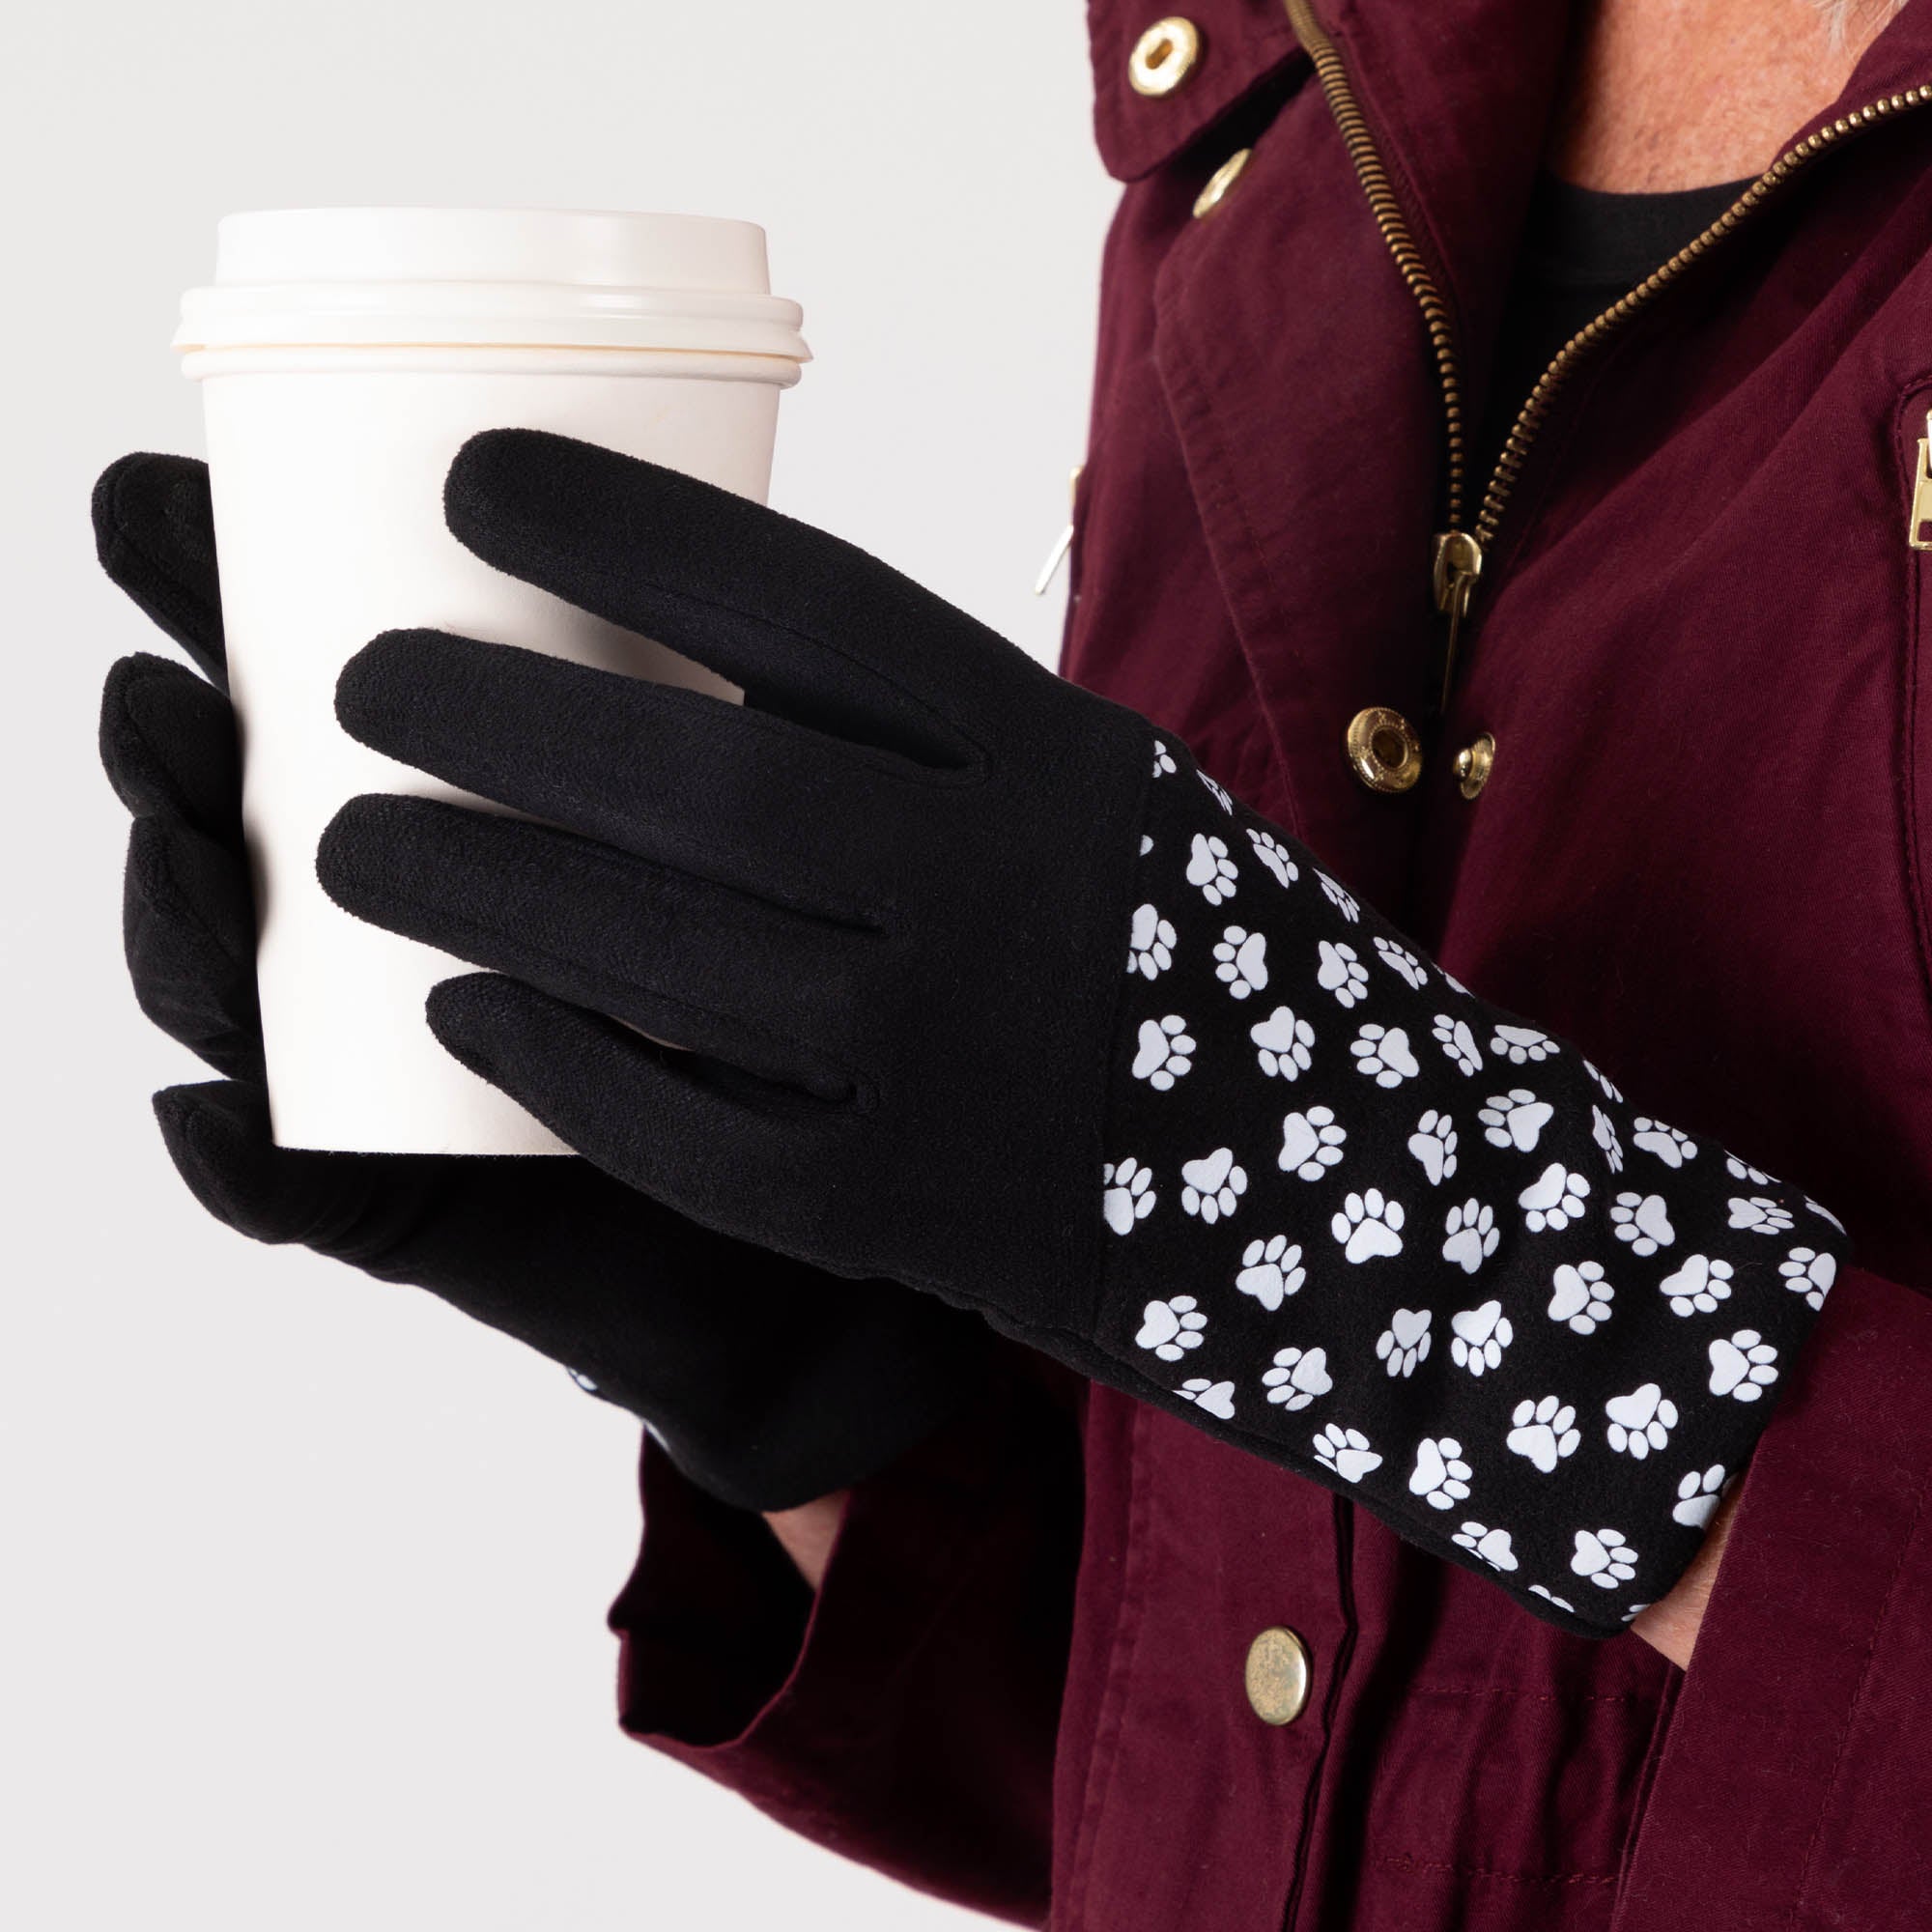 Vibrant Paws Touch Screen Gloves - White Paws